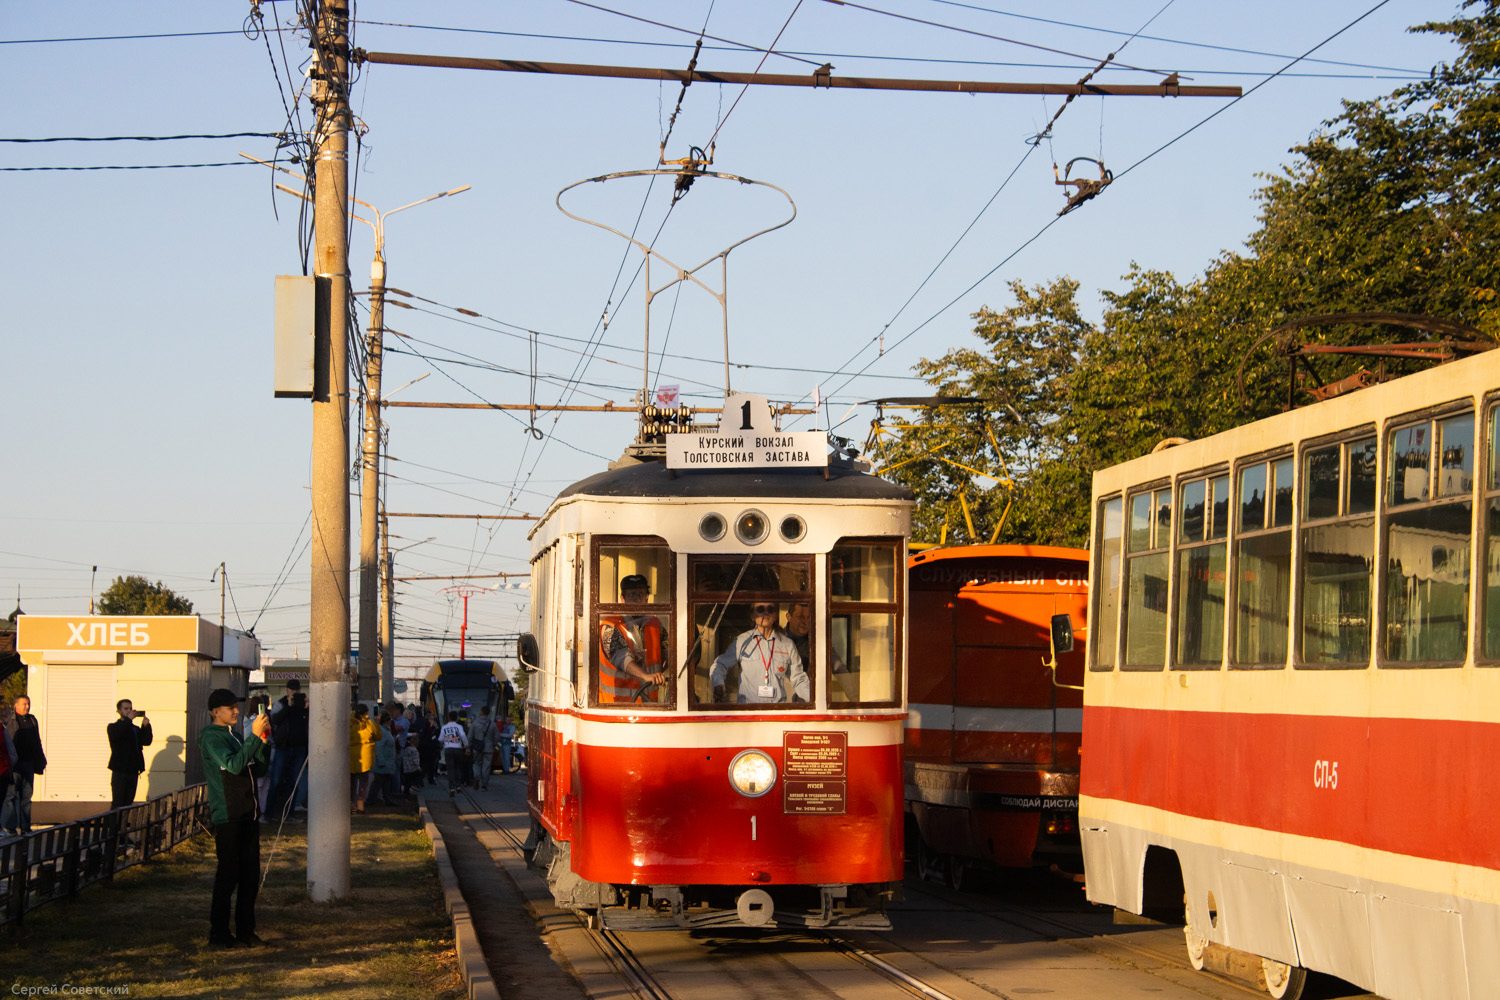 Tula, Kh # 1; Tula — Tram exhibition "95 years in the service of the city" 10.09.2022